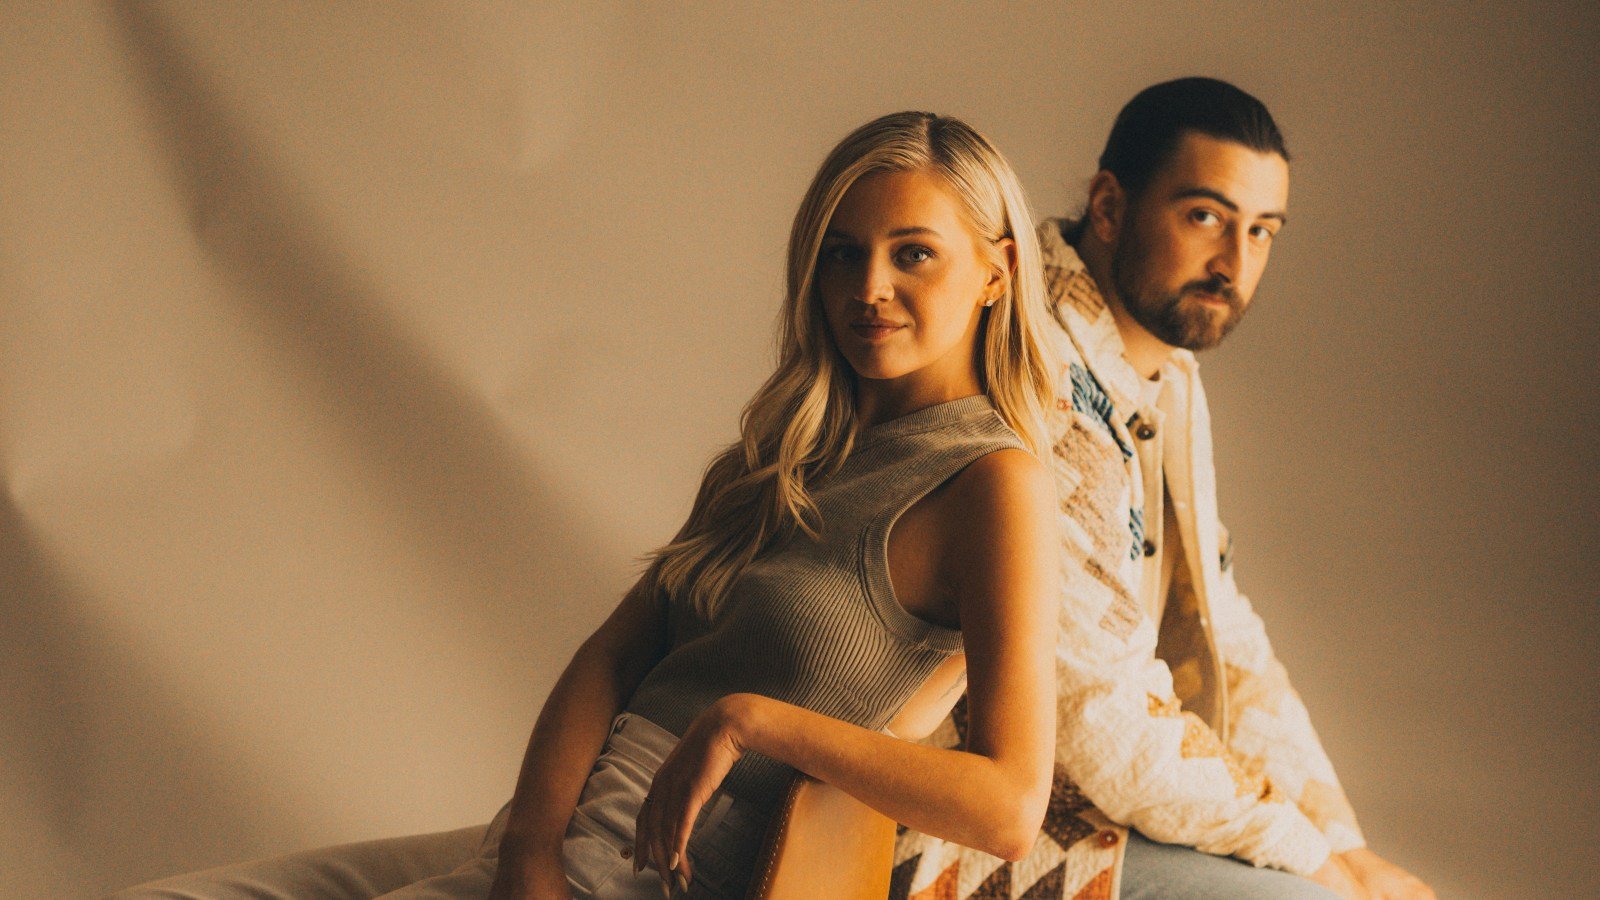 Kelsea Ballerini and Noah Kahan Give Cowboys Permission to Cry on New Song